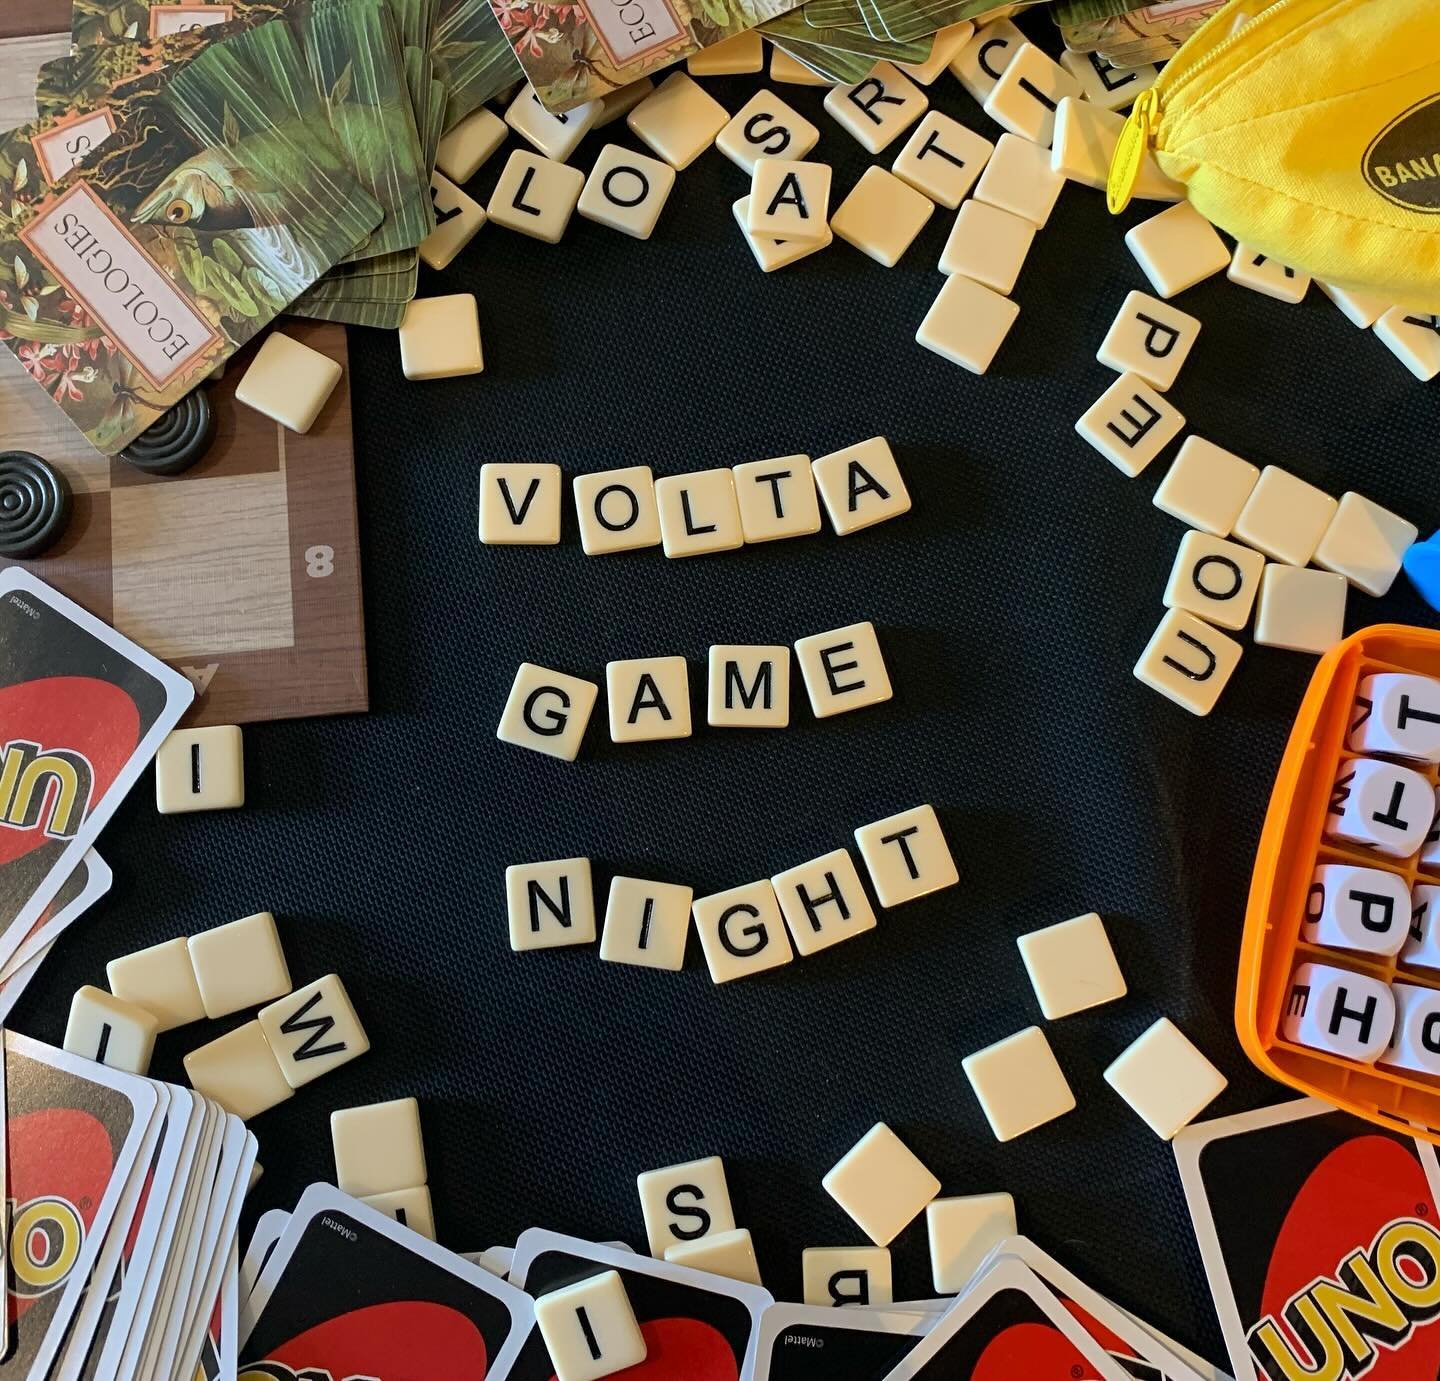 Friday, May 17th (6-9pm) ♟️ Join us for Game Night! We&rsquo;ll have tables set up with a variety of board games, but if there&rsquo;s a particular game you&rsquo;re excited about - feel free to bring it along!

$10 non-members | FREE for members 
(e